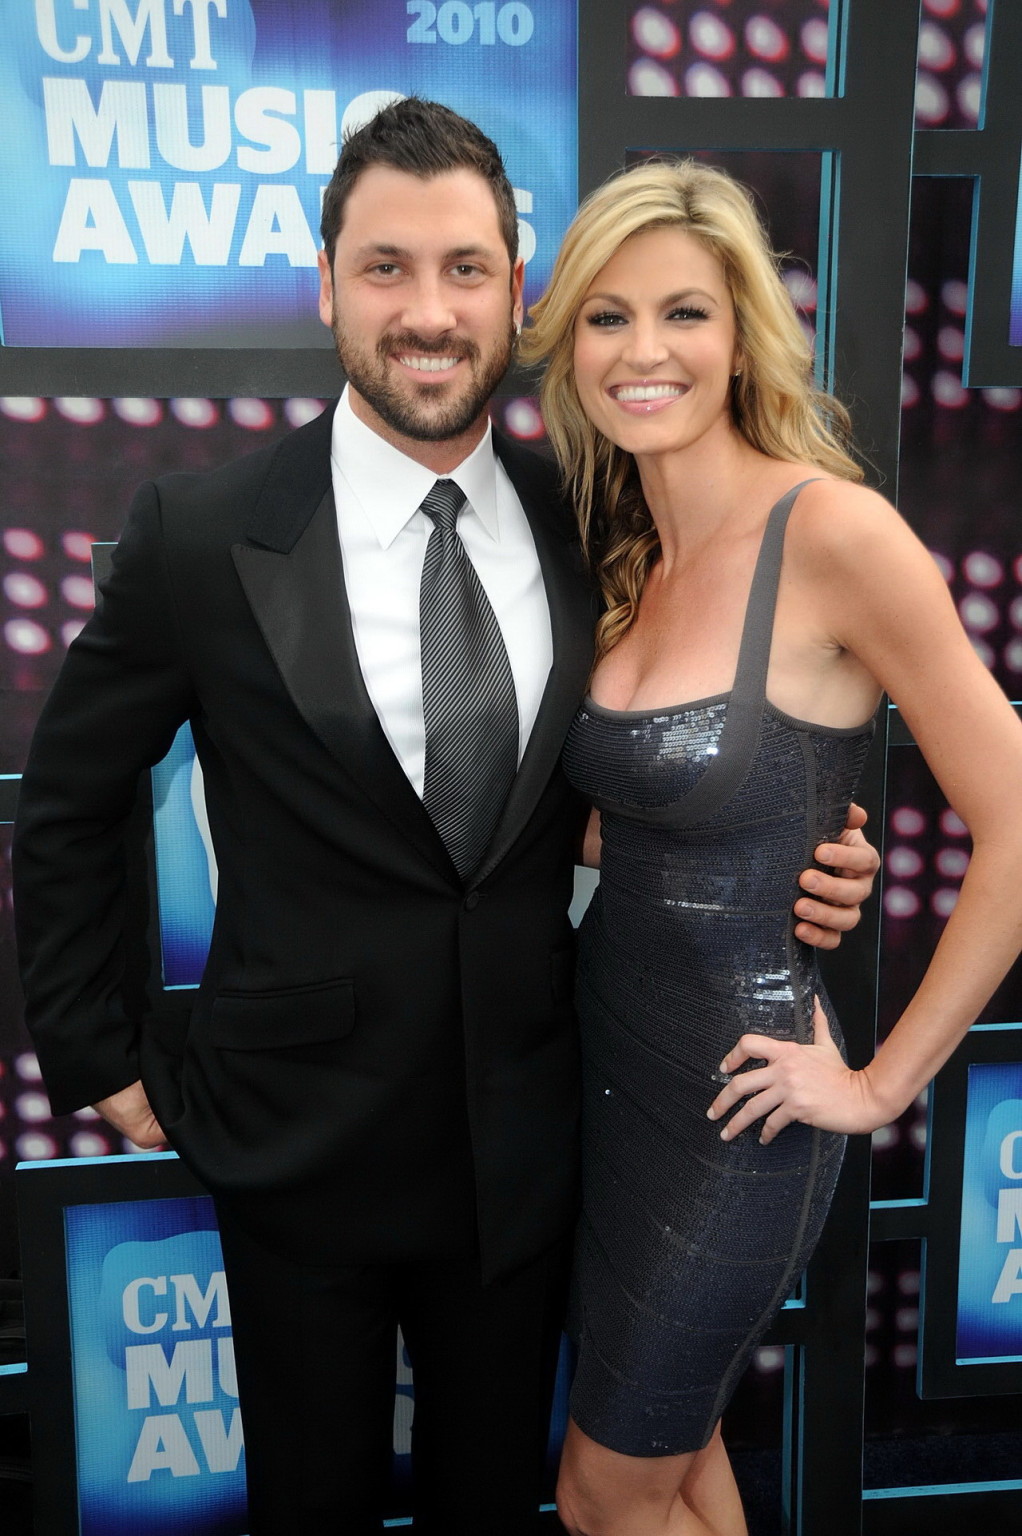 Erin Andrews busty wearing low-cut dress at 2010 CMT Awards #75345917